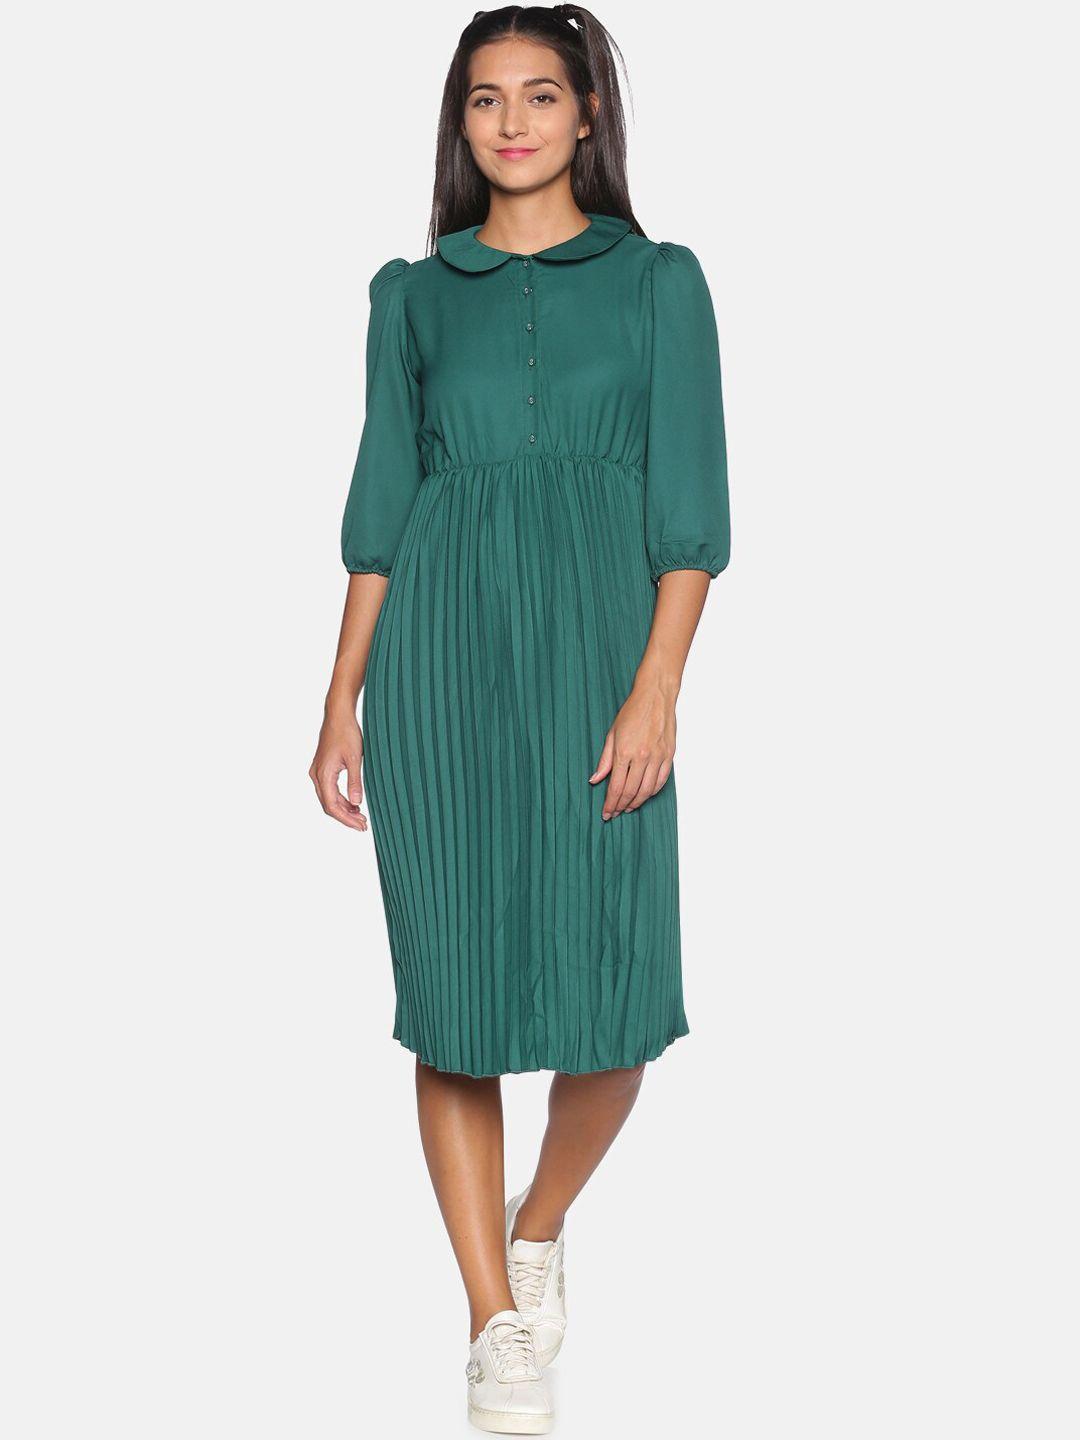 campus sutra green striped crepe a-line dress